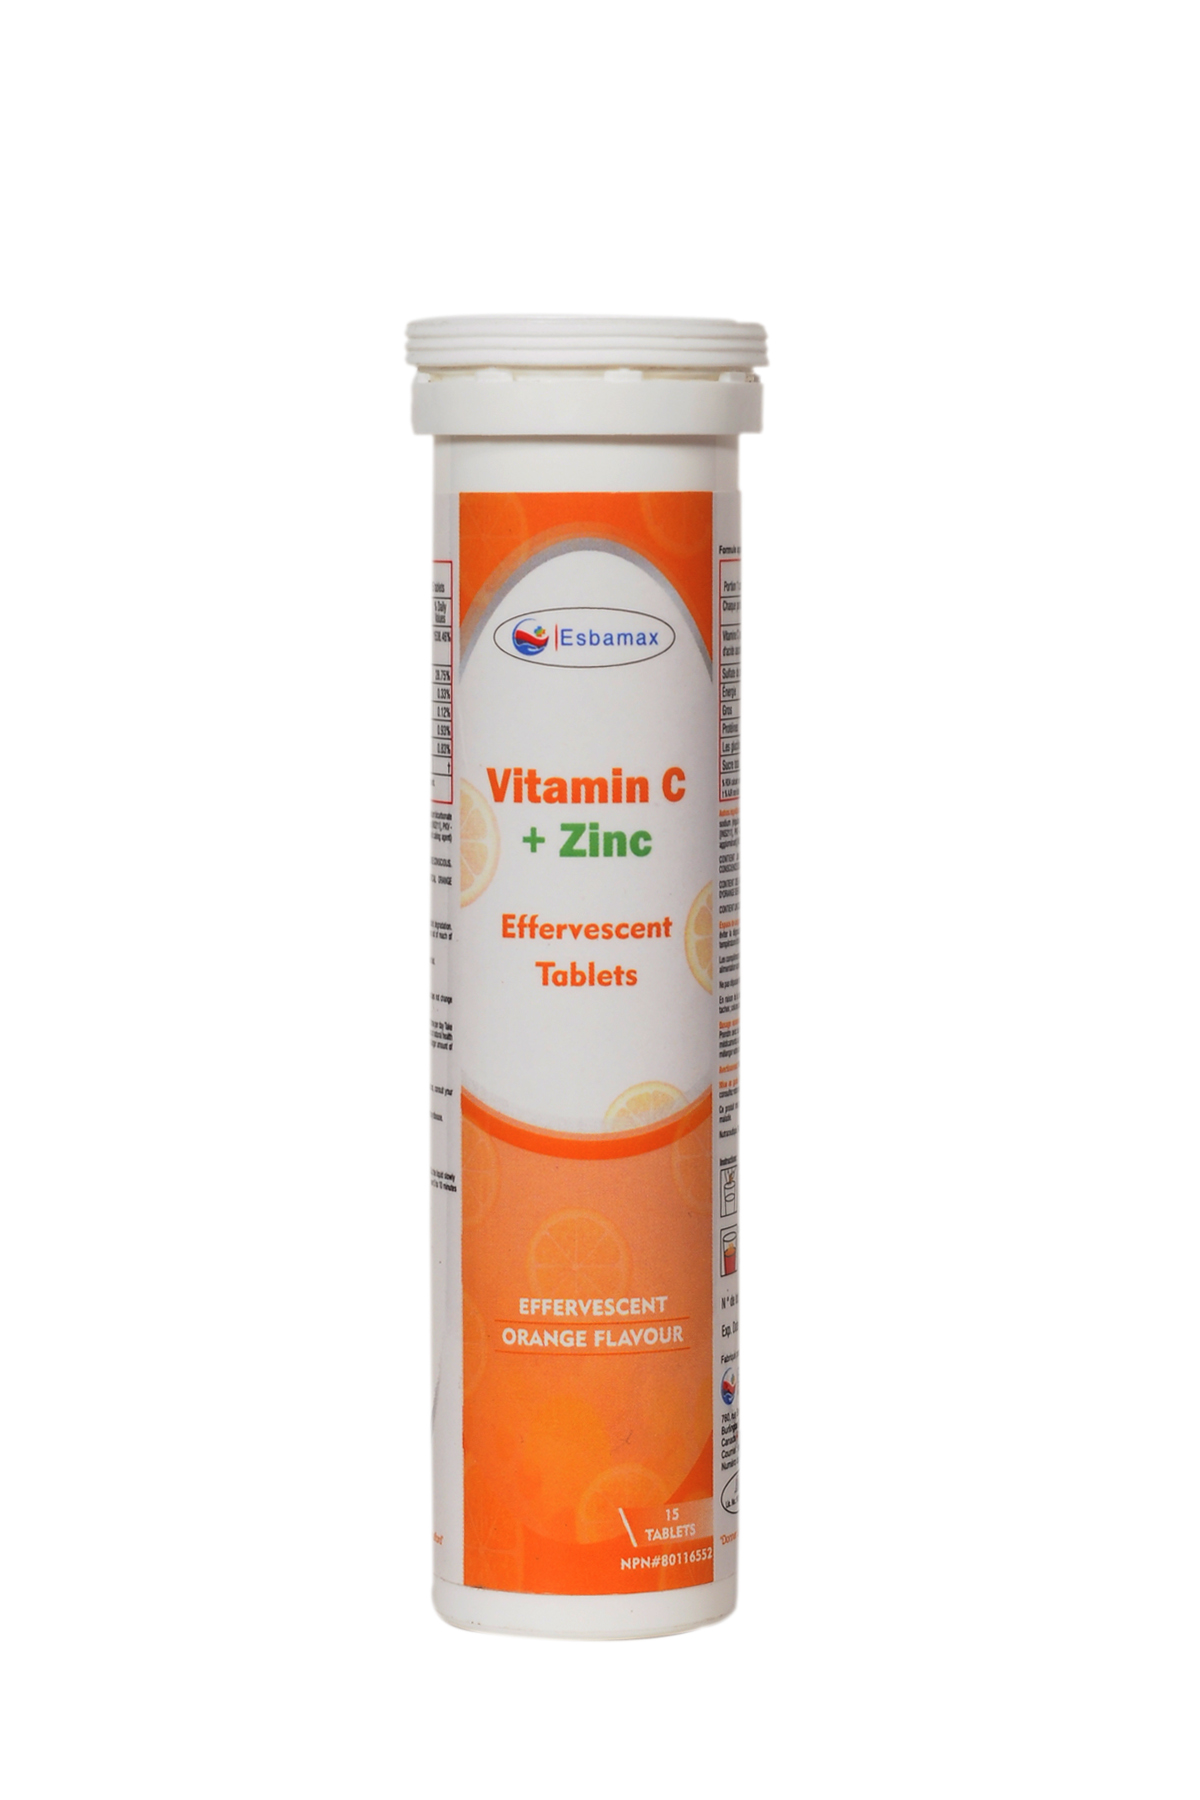 Vitamin C + Zinc Effervescent Tablet.............."FOR PRIVATE LABEL ONLY"